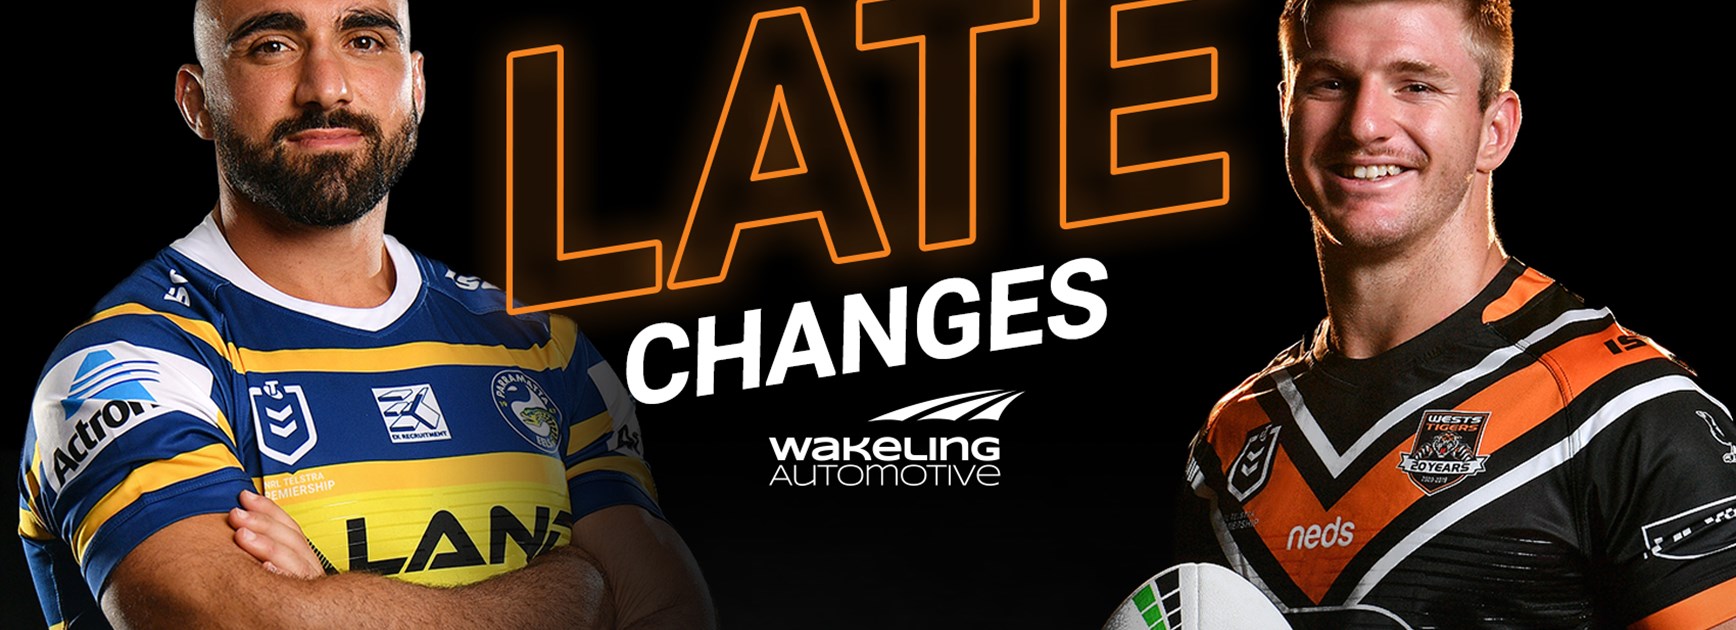 NRL Late Changes: Round 6